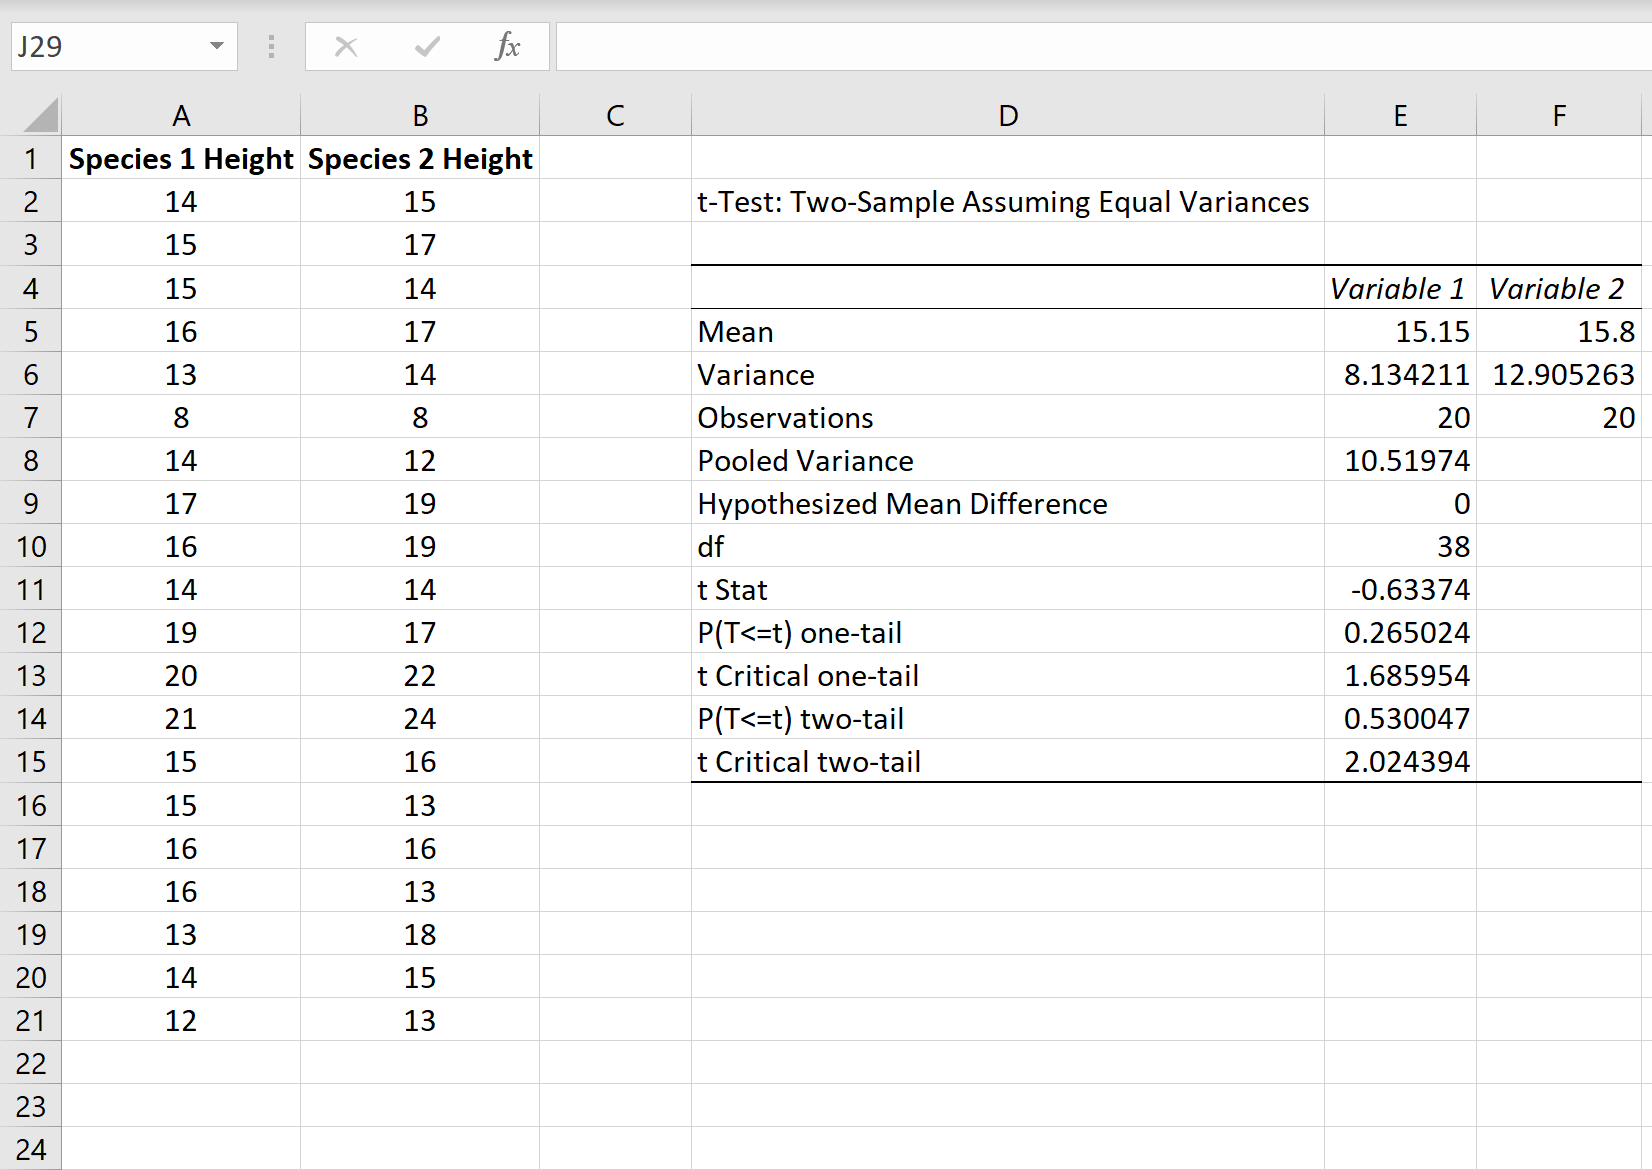 How to interpret results of a two sample t-test in Excel